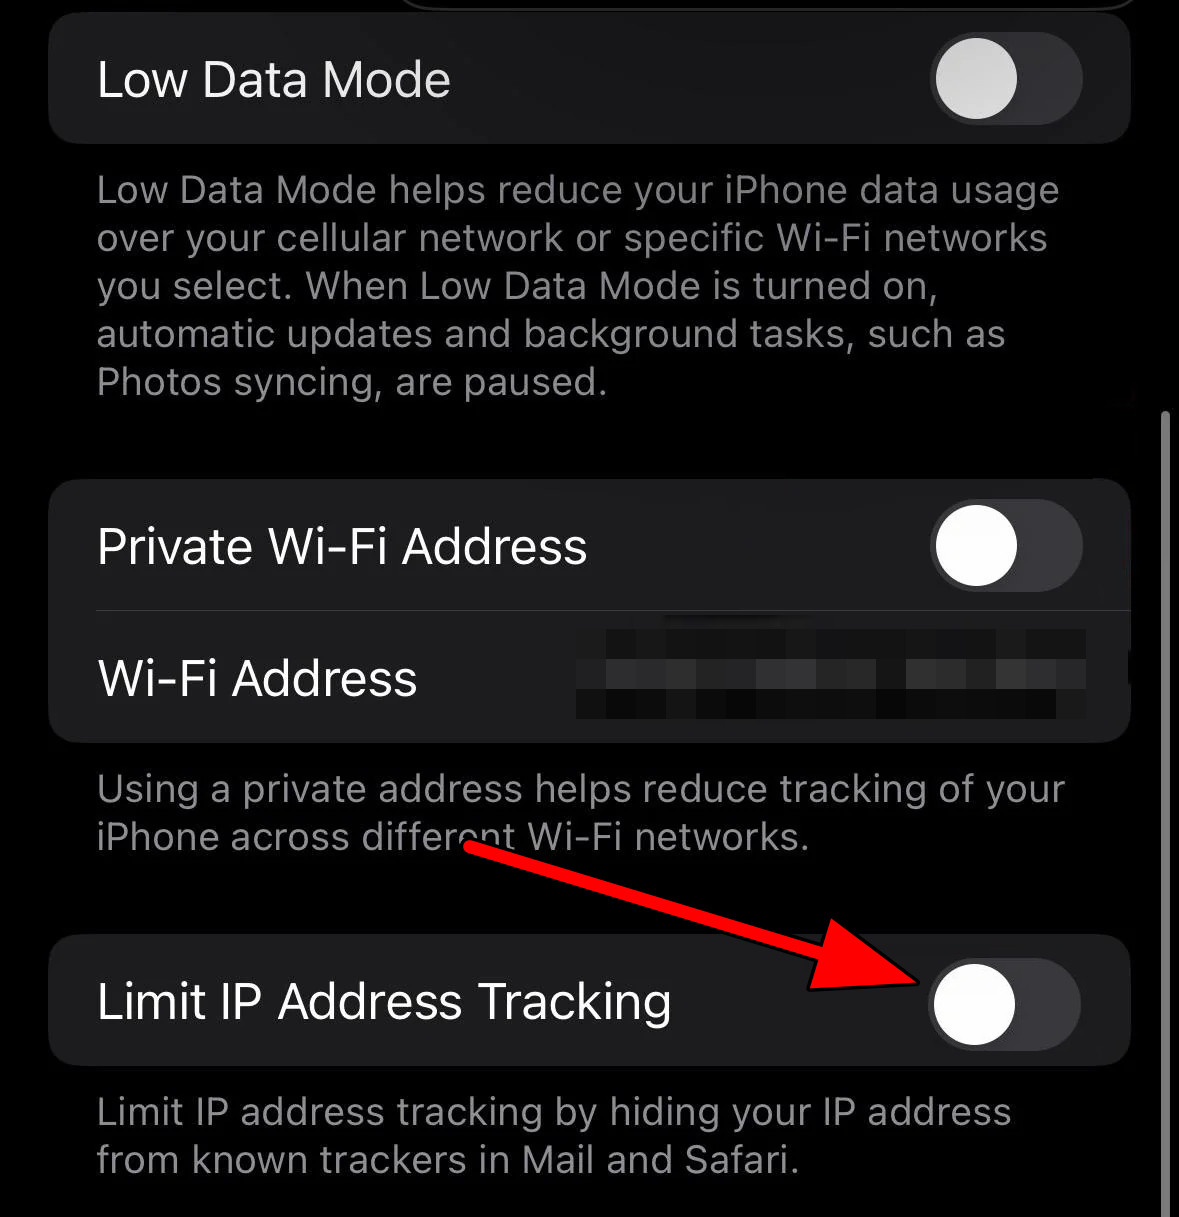 Disable Limit IP Address Tracking on the iPhone